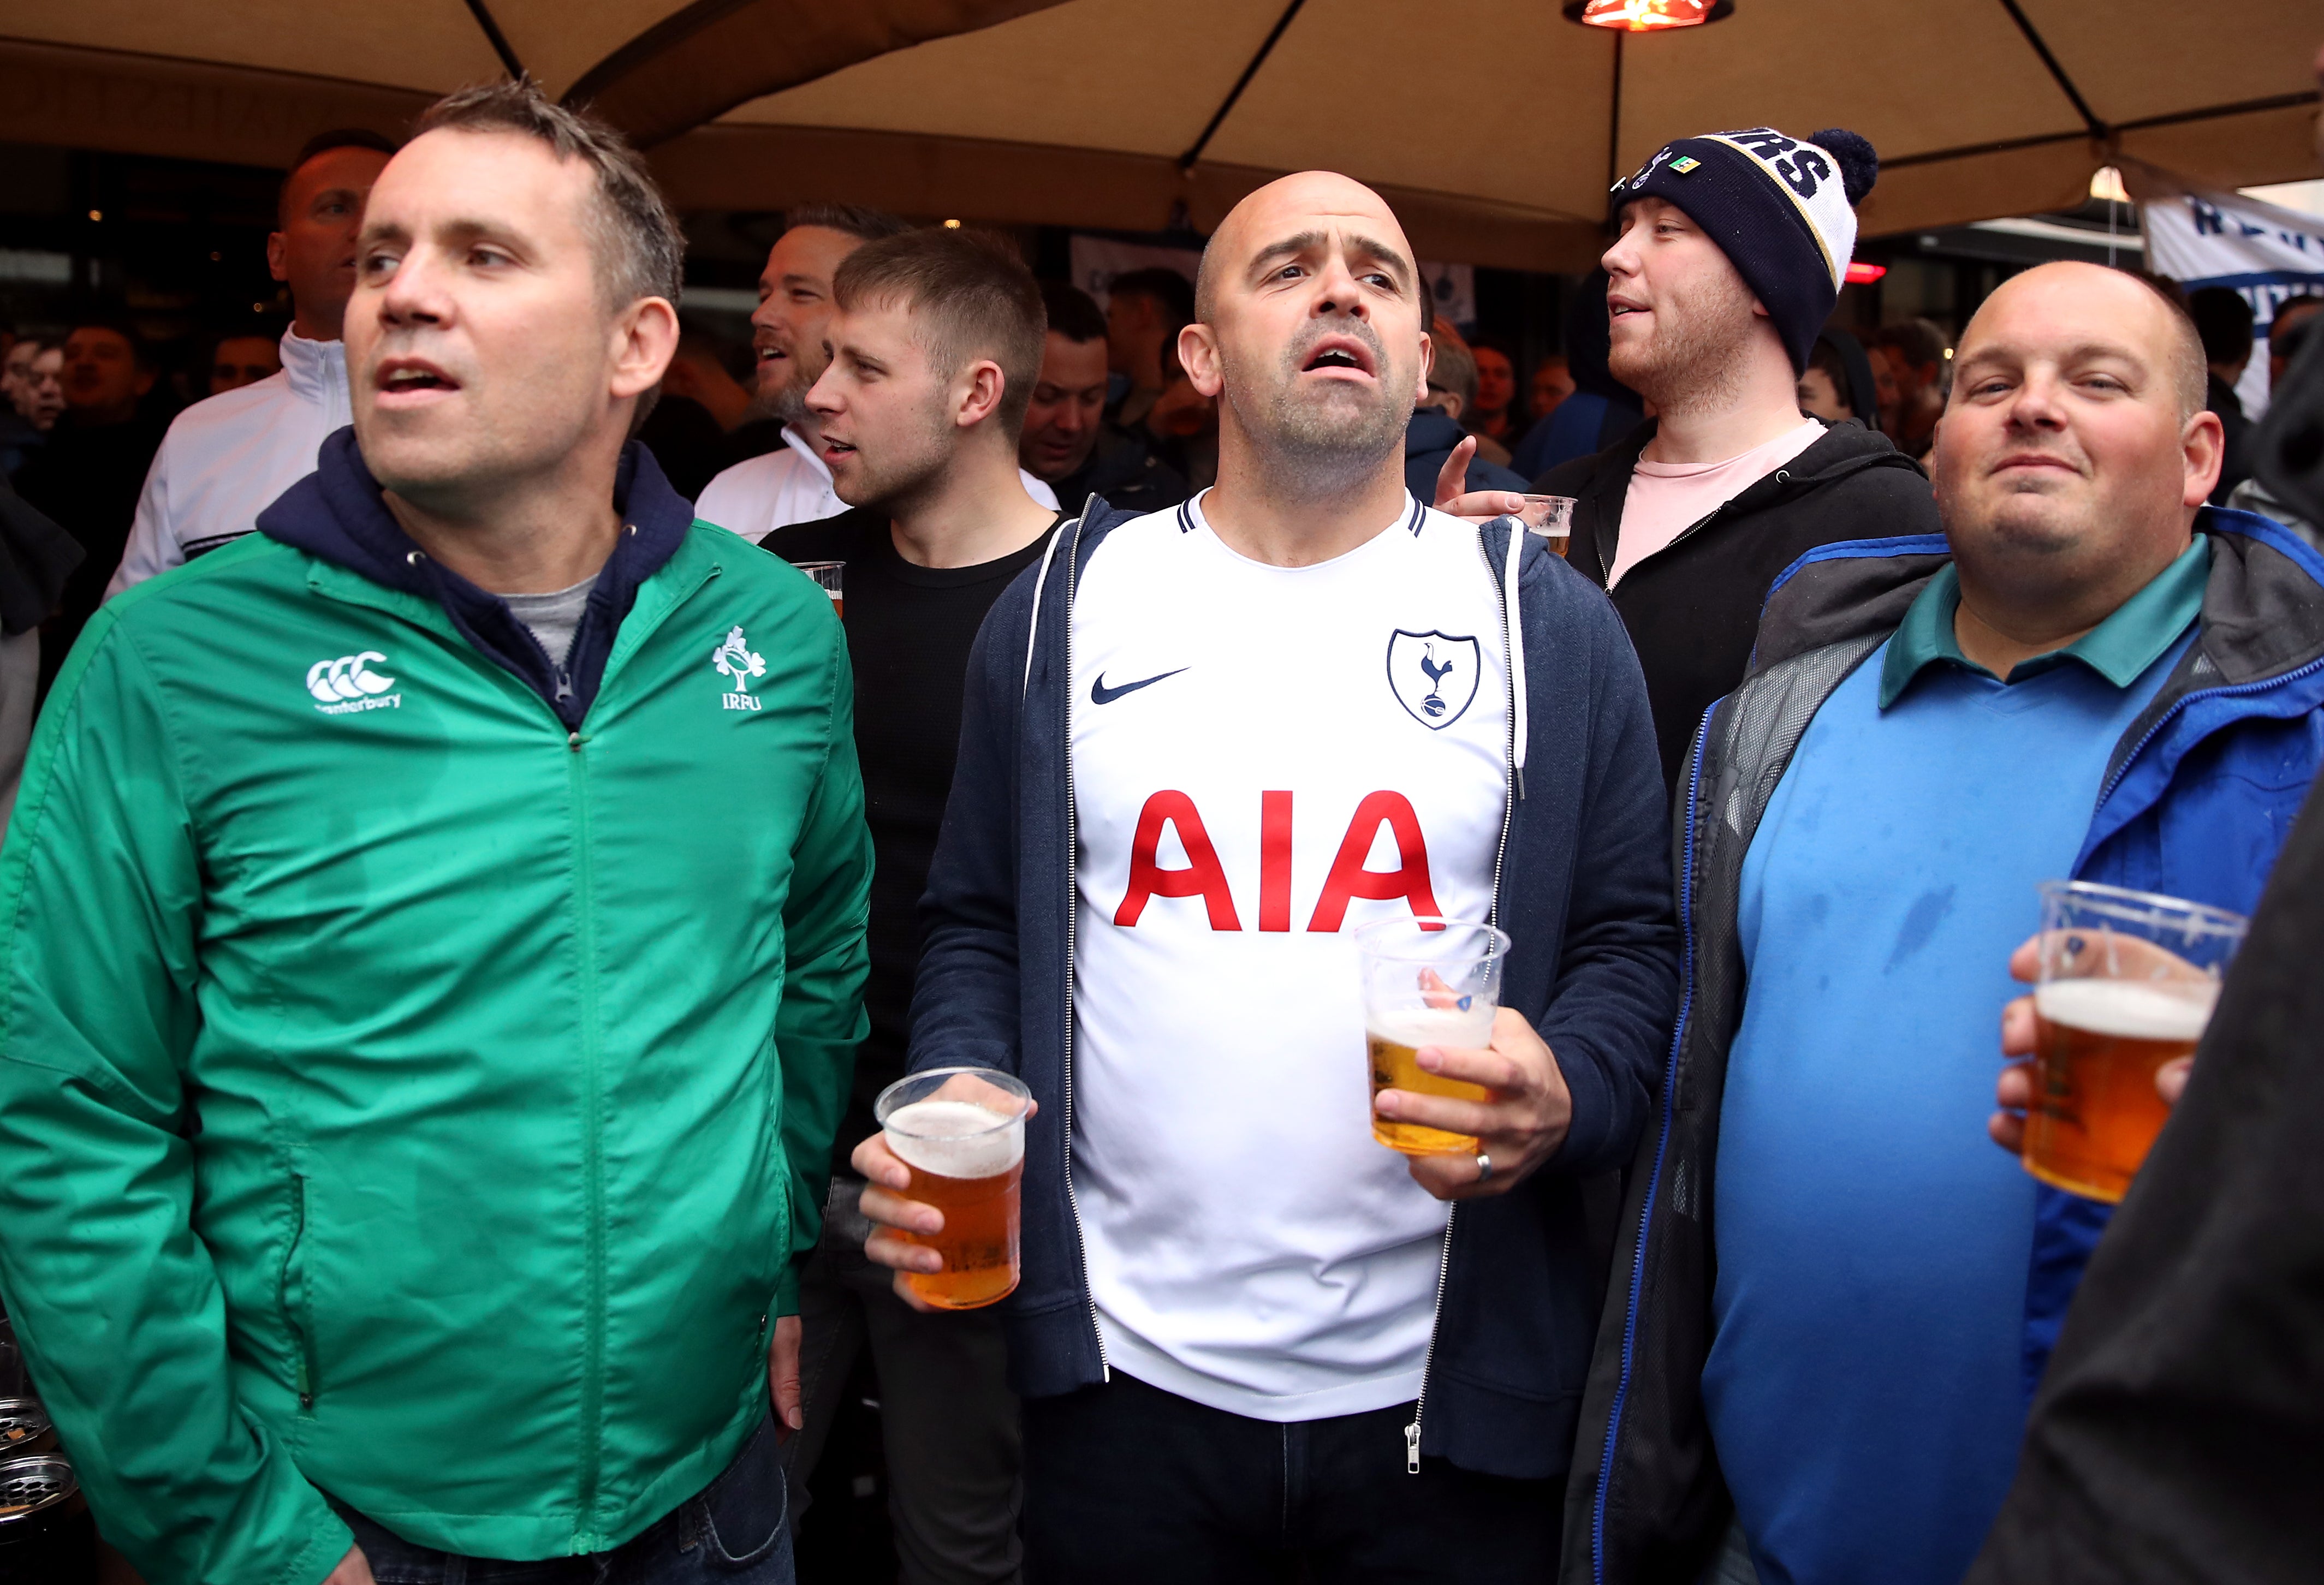 Football fans could be allowed to drink at matches if the recommendations of a fan-led review are accepted